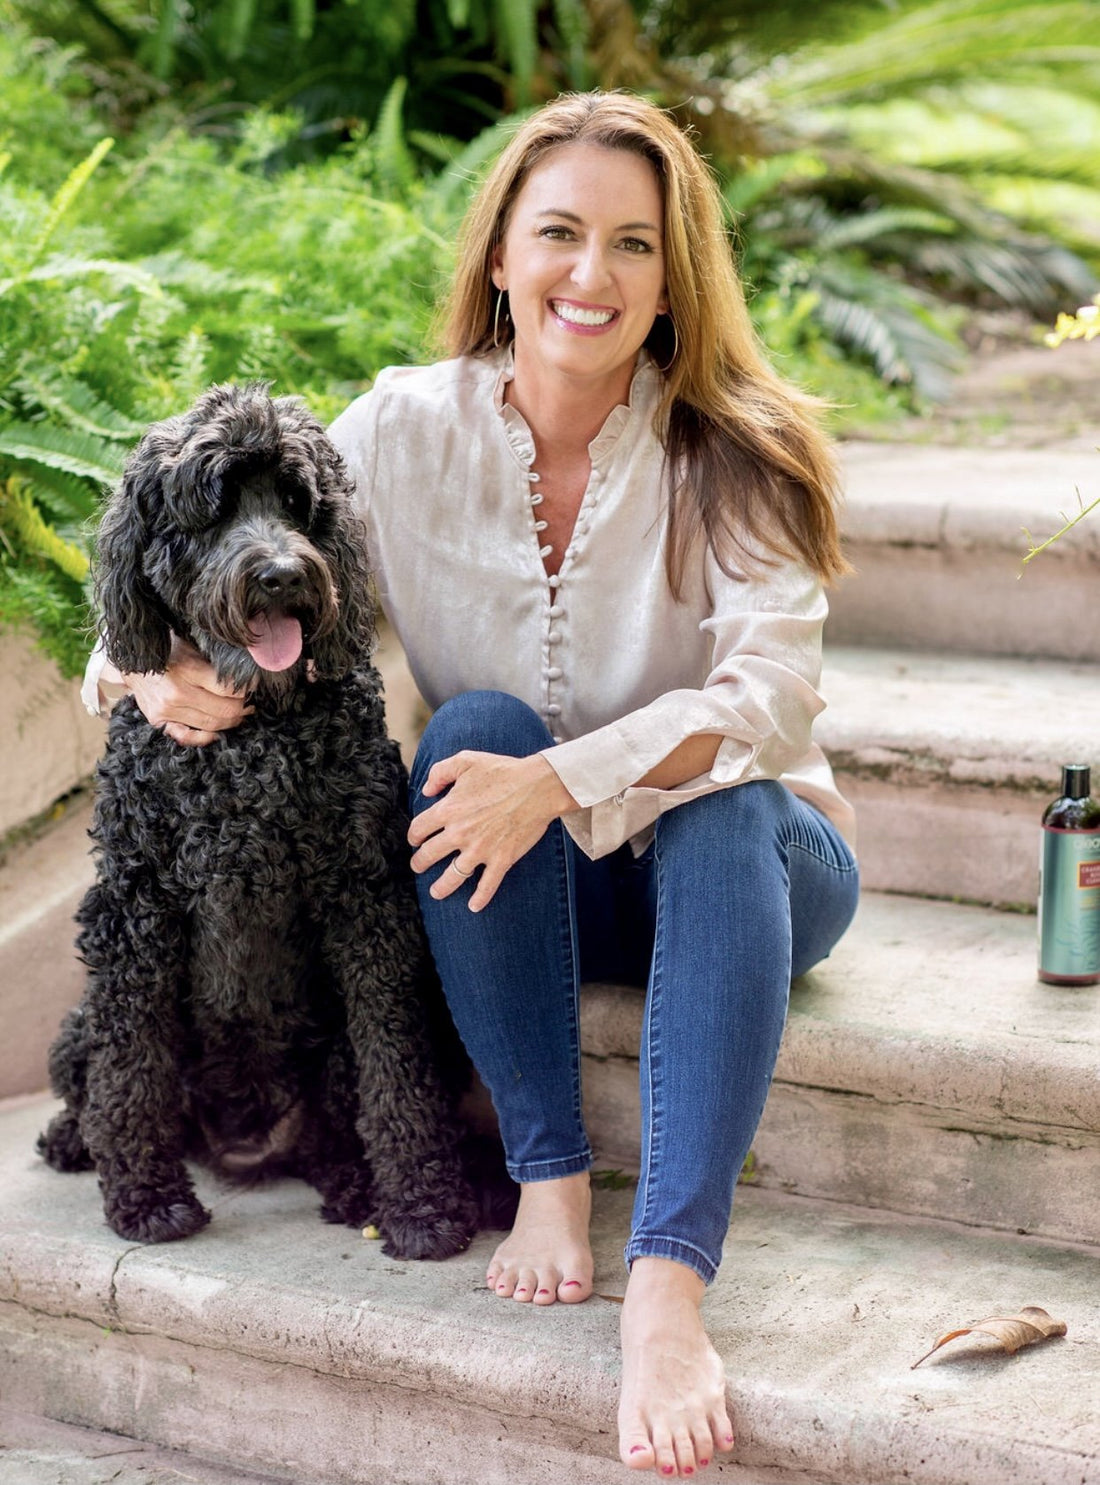 Madisons' Muses: Meet Kelly Graham, the Founder of Aleavia Skin Care | The Salty Vogue